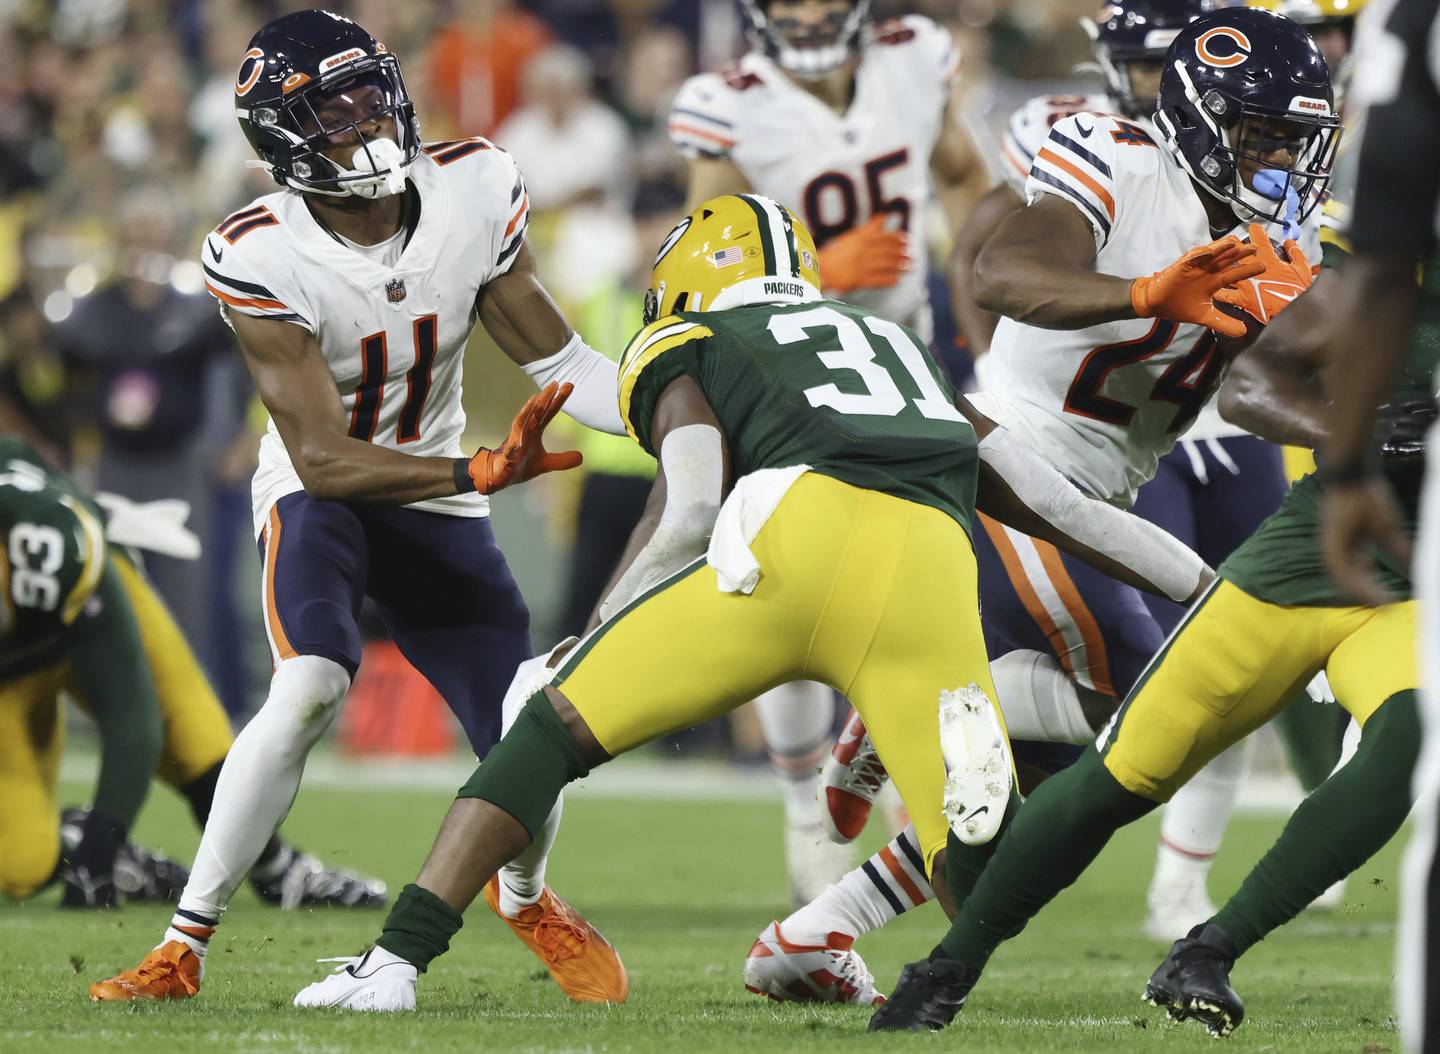 Bears wide receiver Darnell Mooney (11) blocks Packers safety Adrian Amos (31) as running back Khalil Herbert (24) rushes for a first down Sept. 18, 2022, at Lambeau Field in Green Bay.